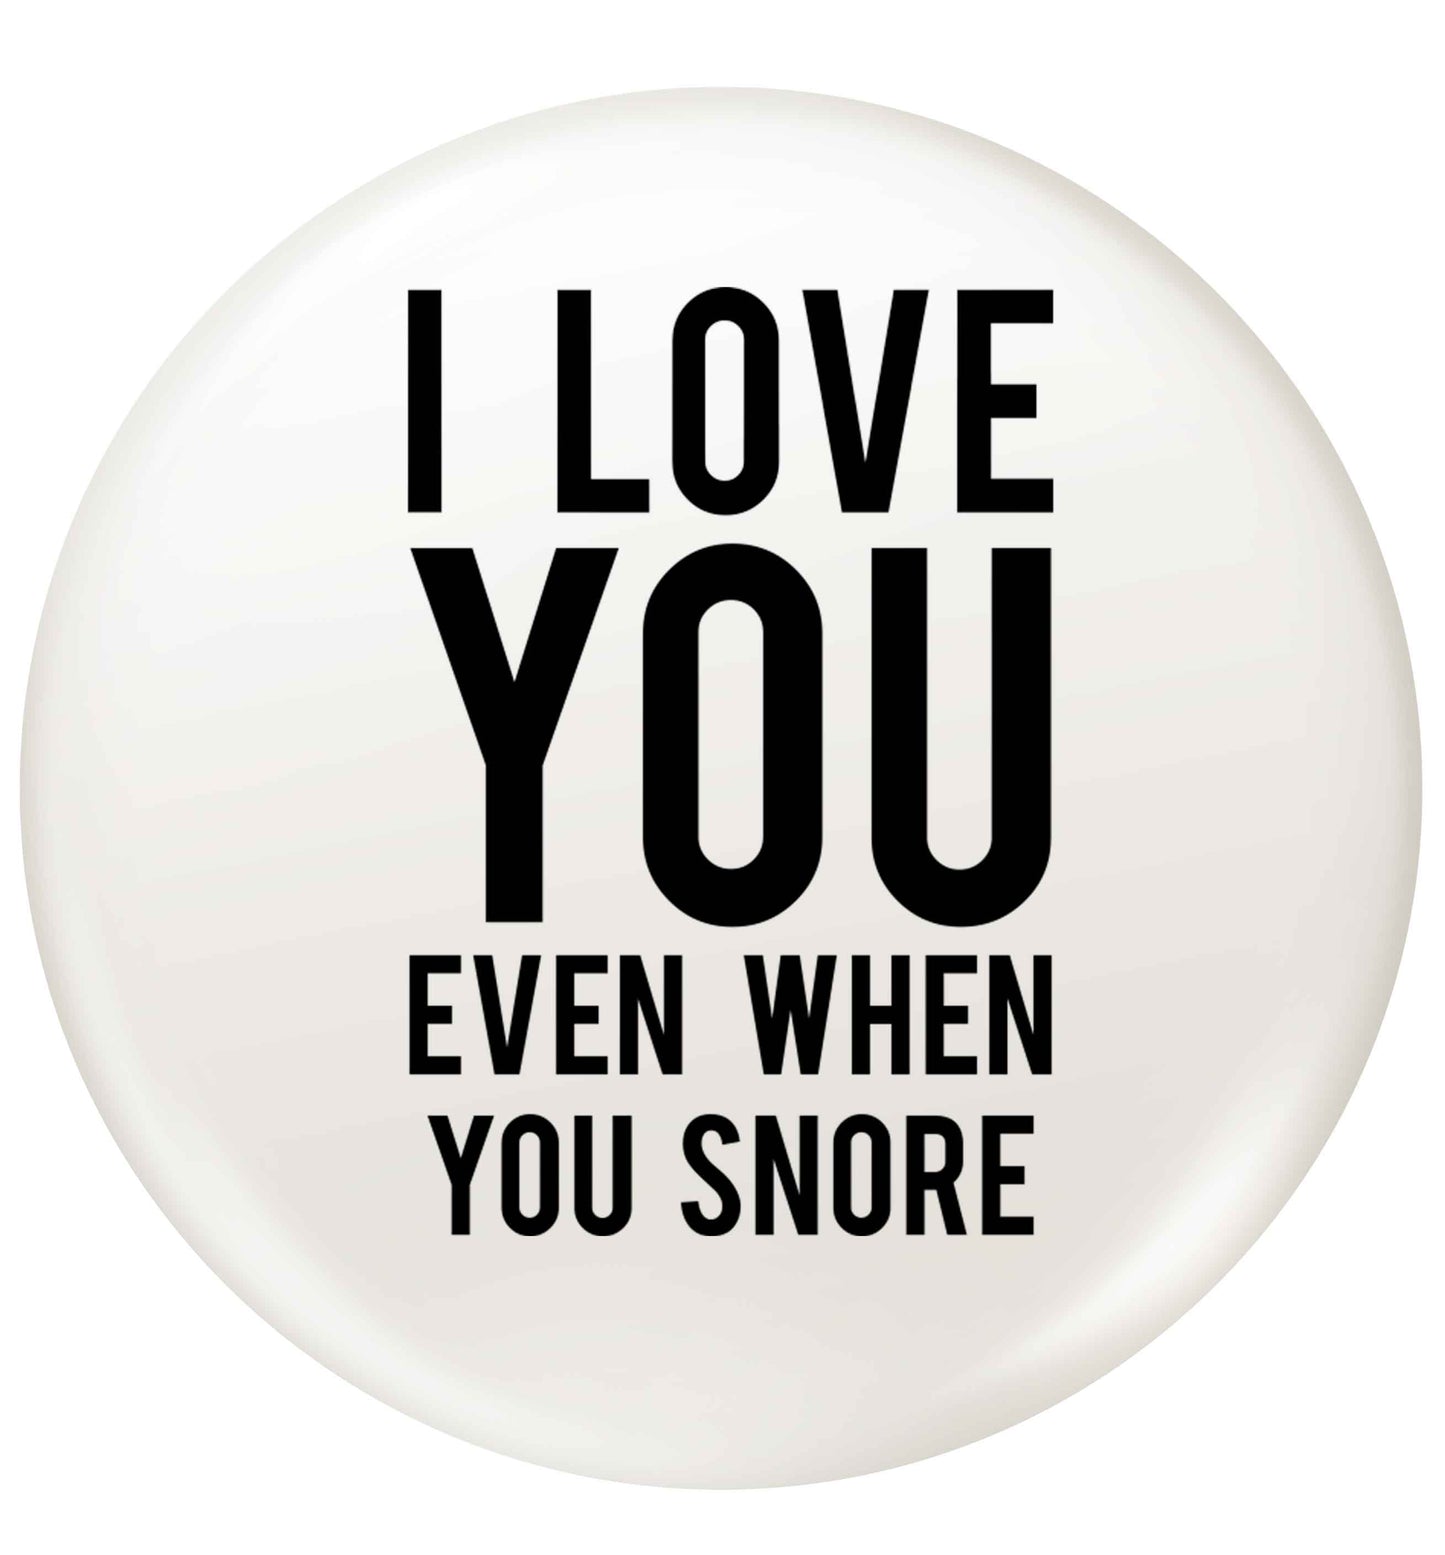 I love you even when you snore small 25mm Pin badge